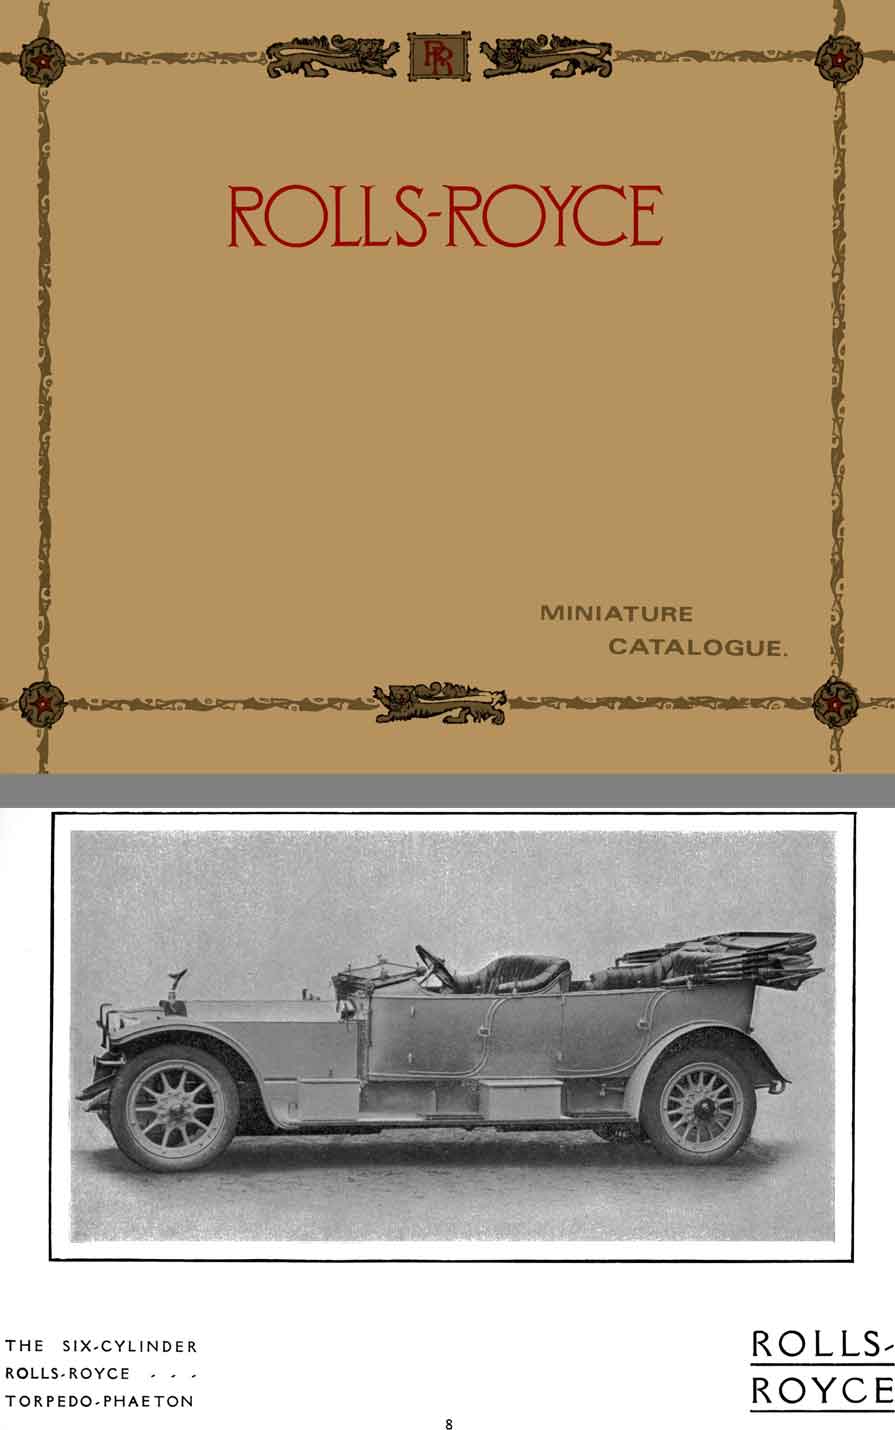 Rolls Royce (c1913) - Miniature Catalogue - The Best Car in the World - The 40/50HP Six Cylinder RR